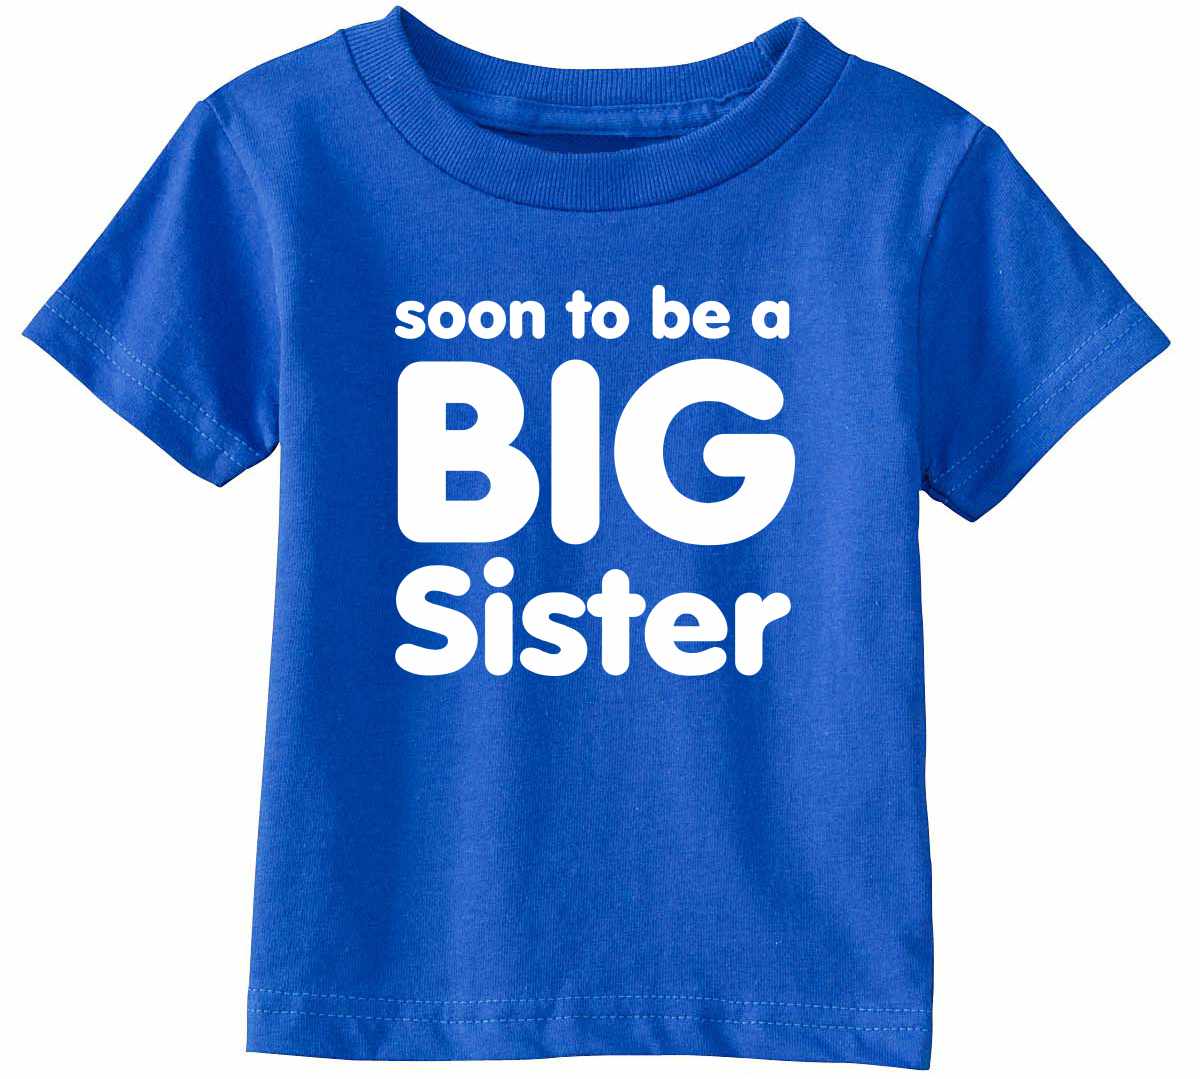 Soon to be a BIG SISTER Infant/Toddler  (#714-7)